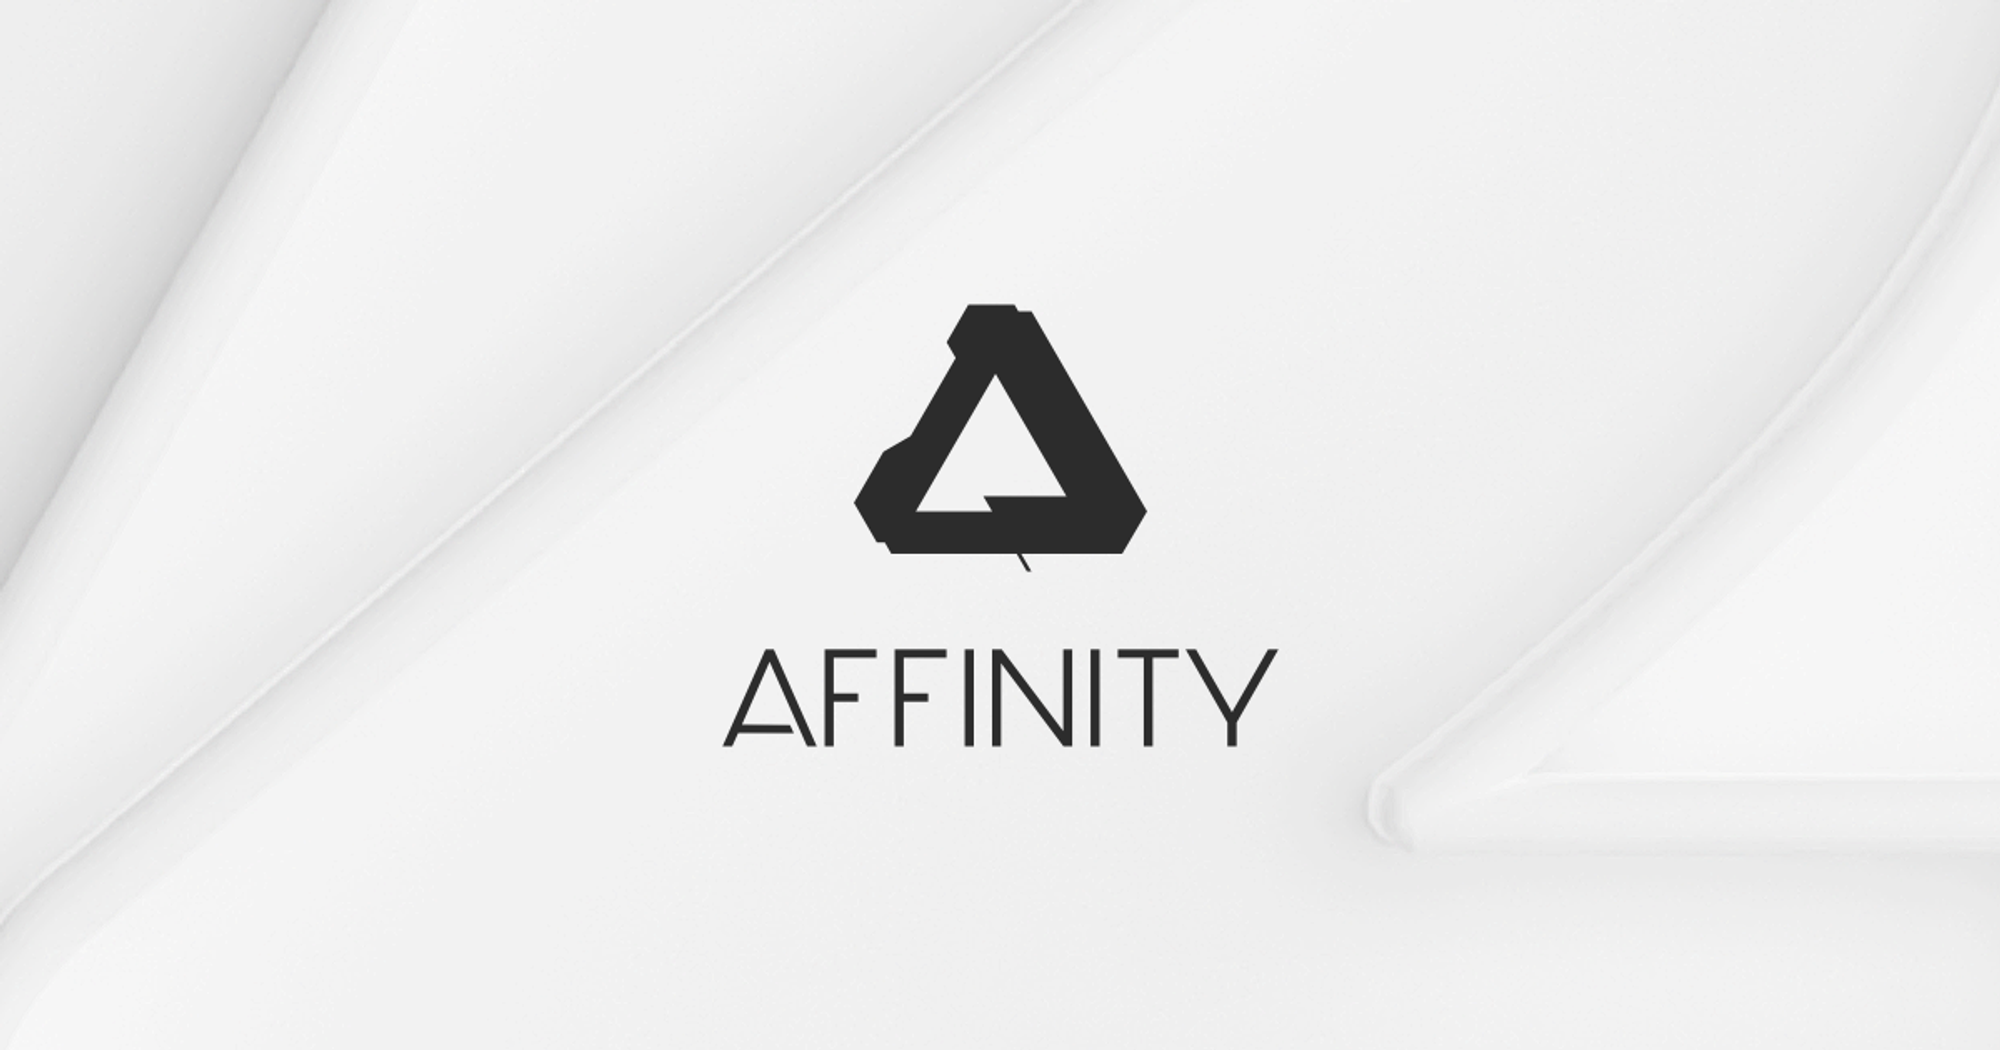 Affinity - Purchase options and pricing